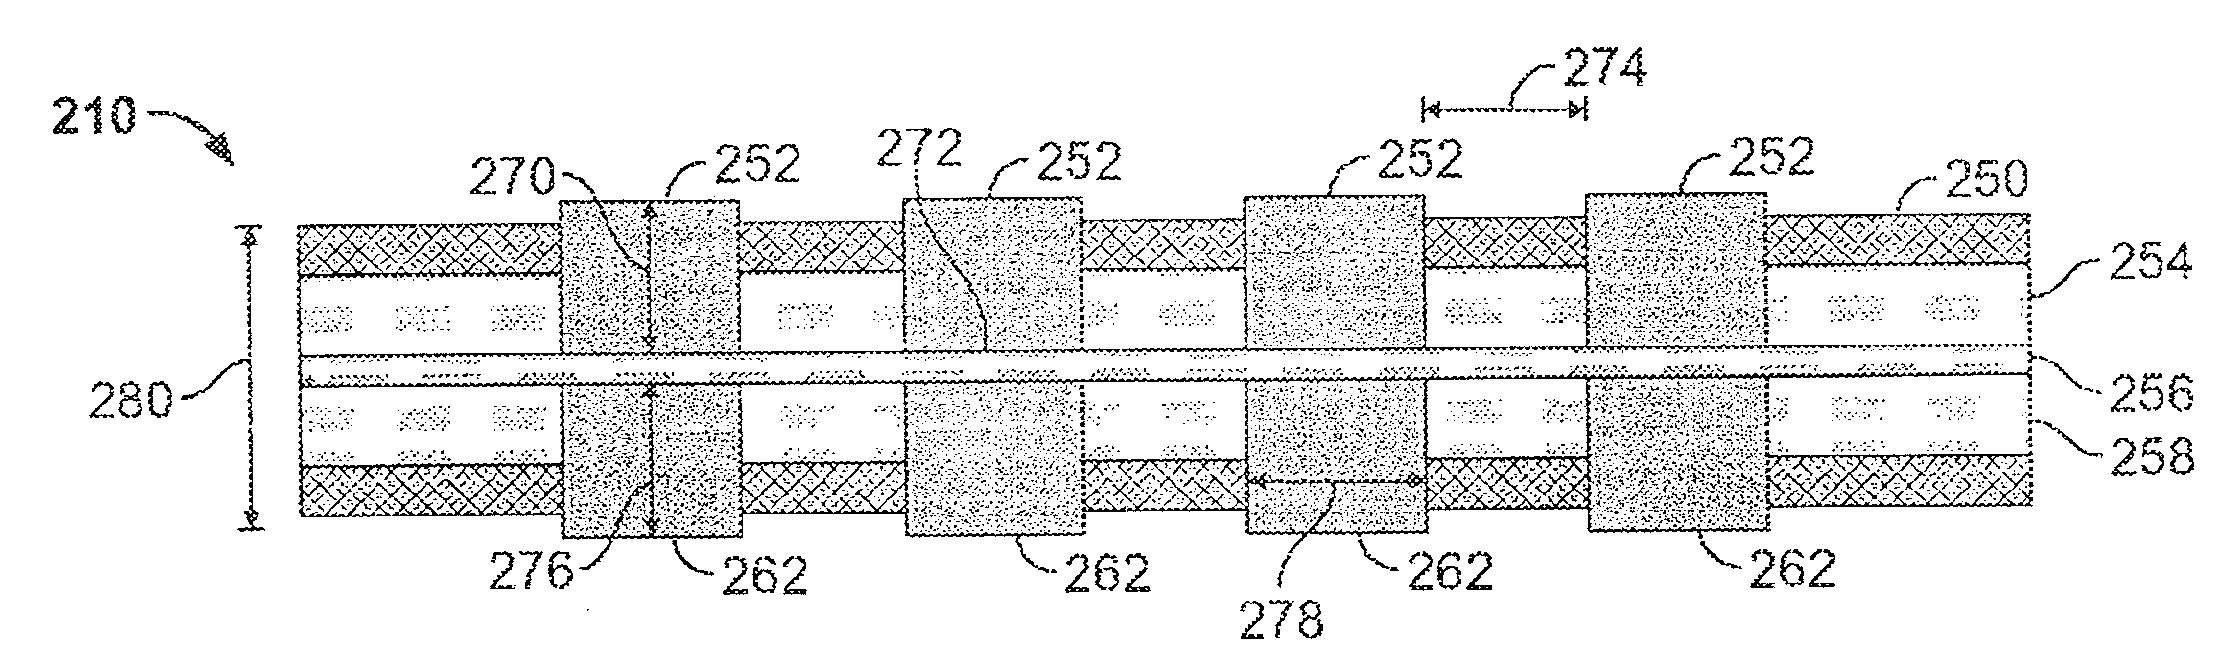 Fuel cell apparatus and method of fabrication